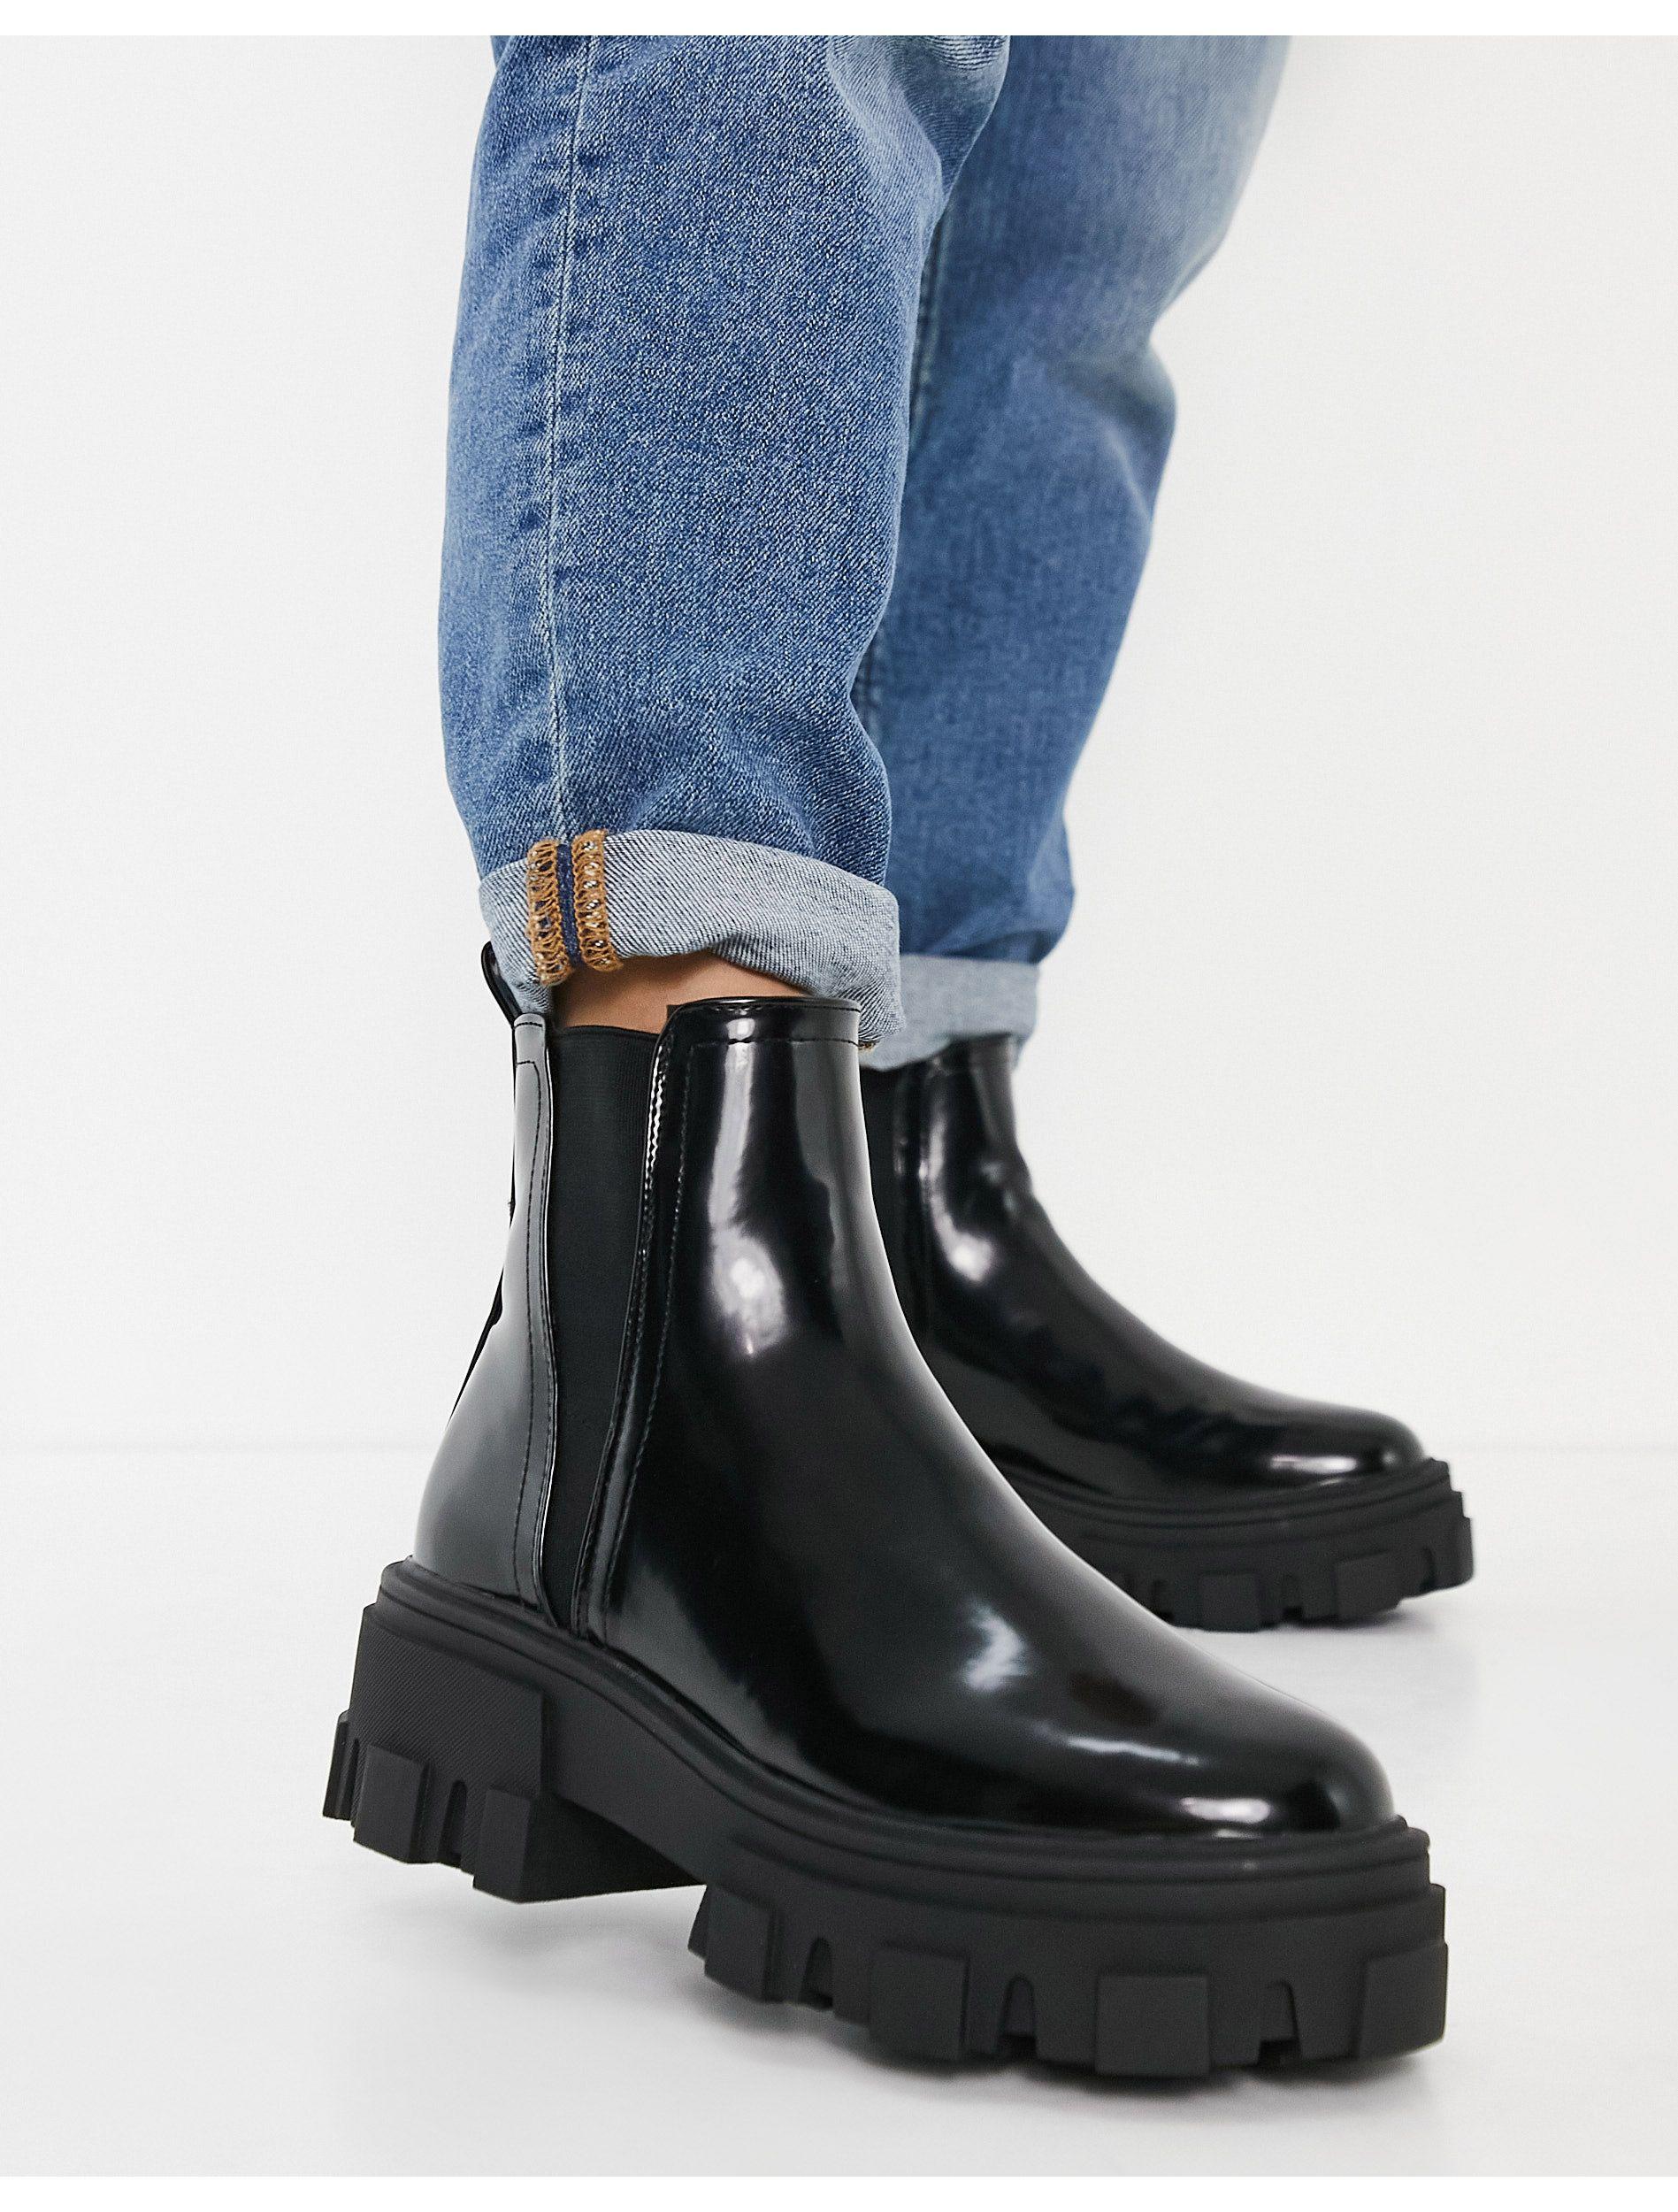 ASOS Addy Chunky Chelsea Boots in Black - Lyst